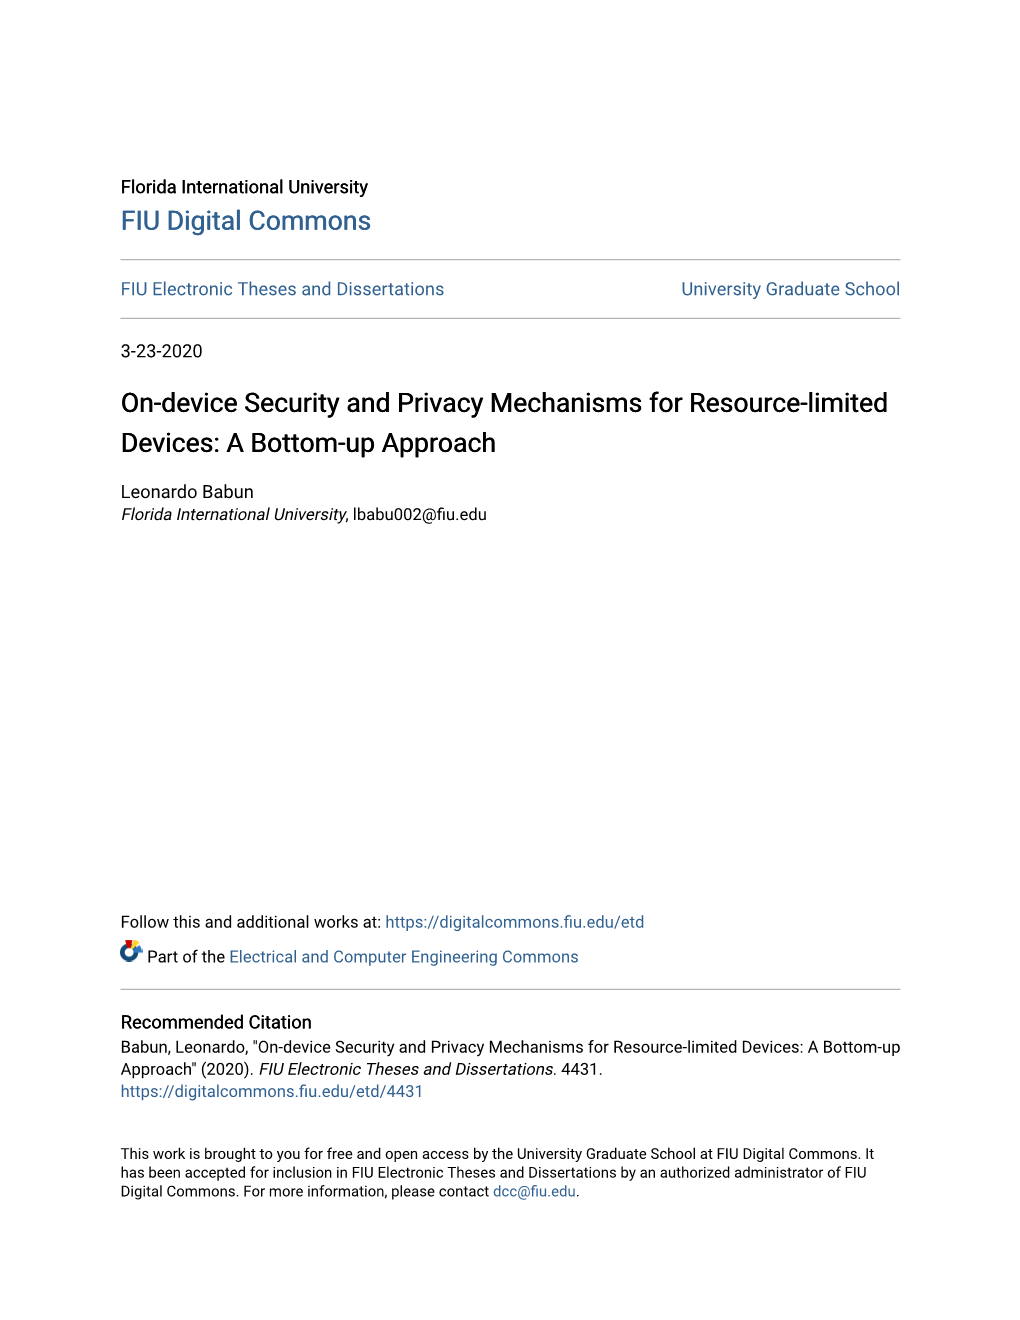 On-Device Security and Privacy Mechanisms for Resource-Limited Devices: a Bottom-Up Approach